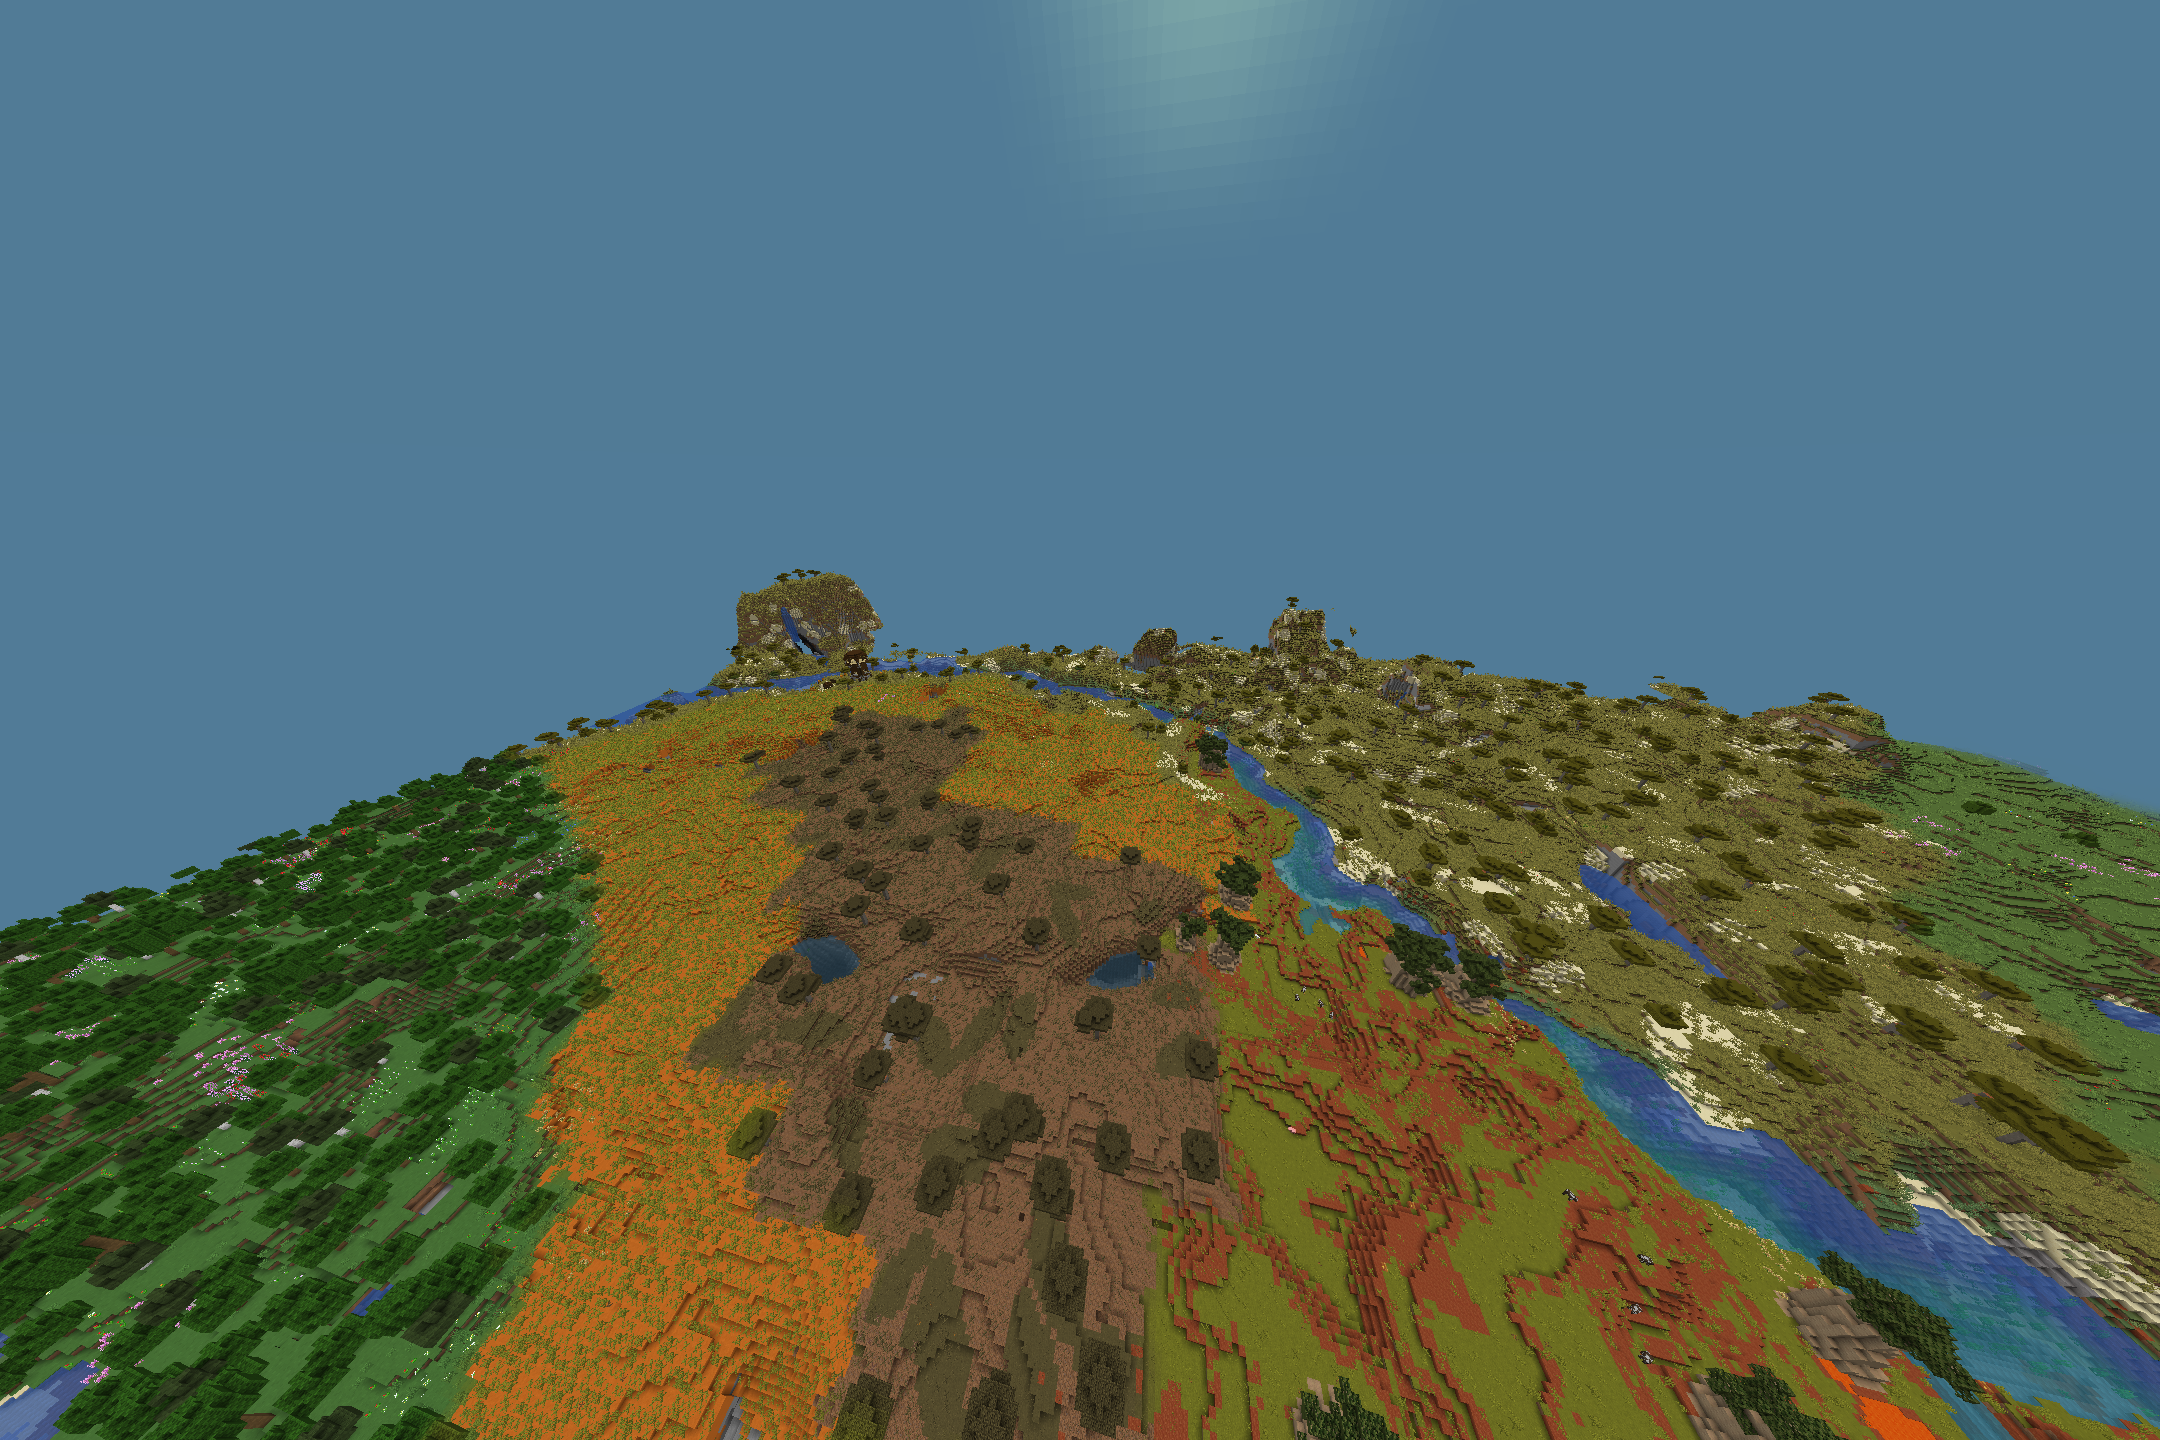 Other biomes from above